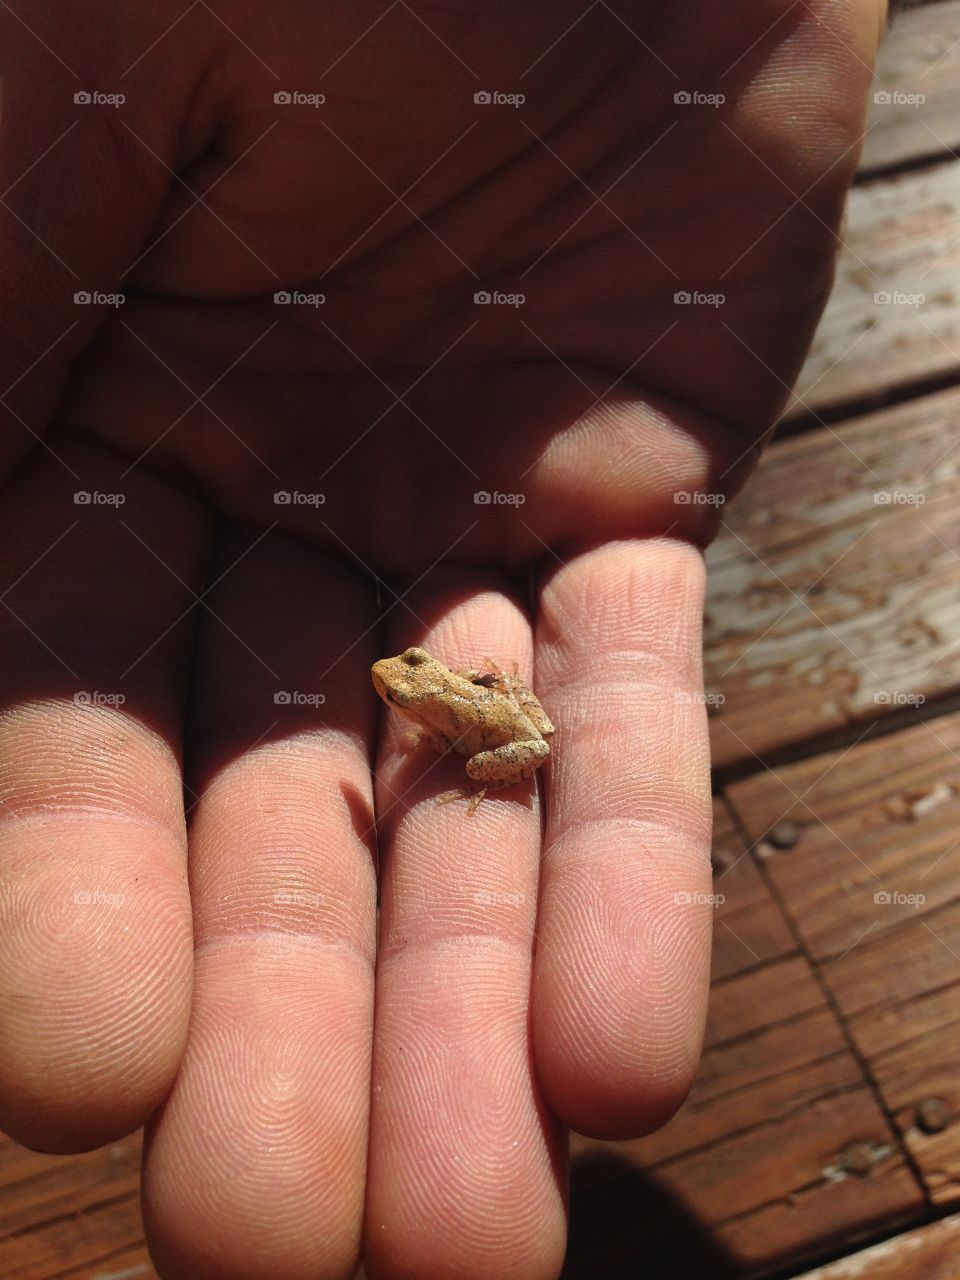 Baby frog